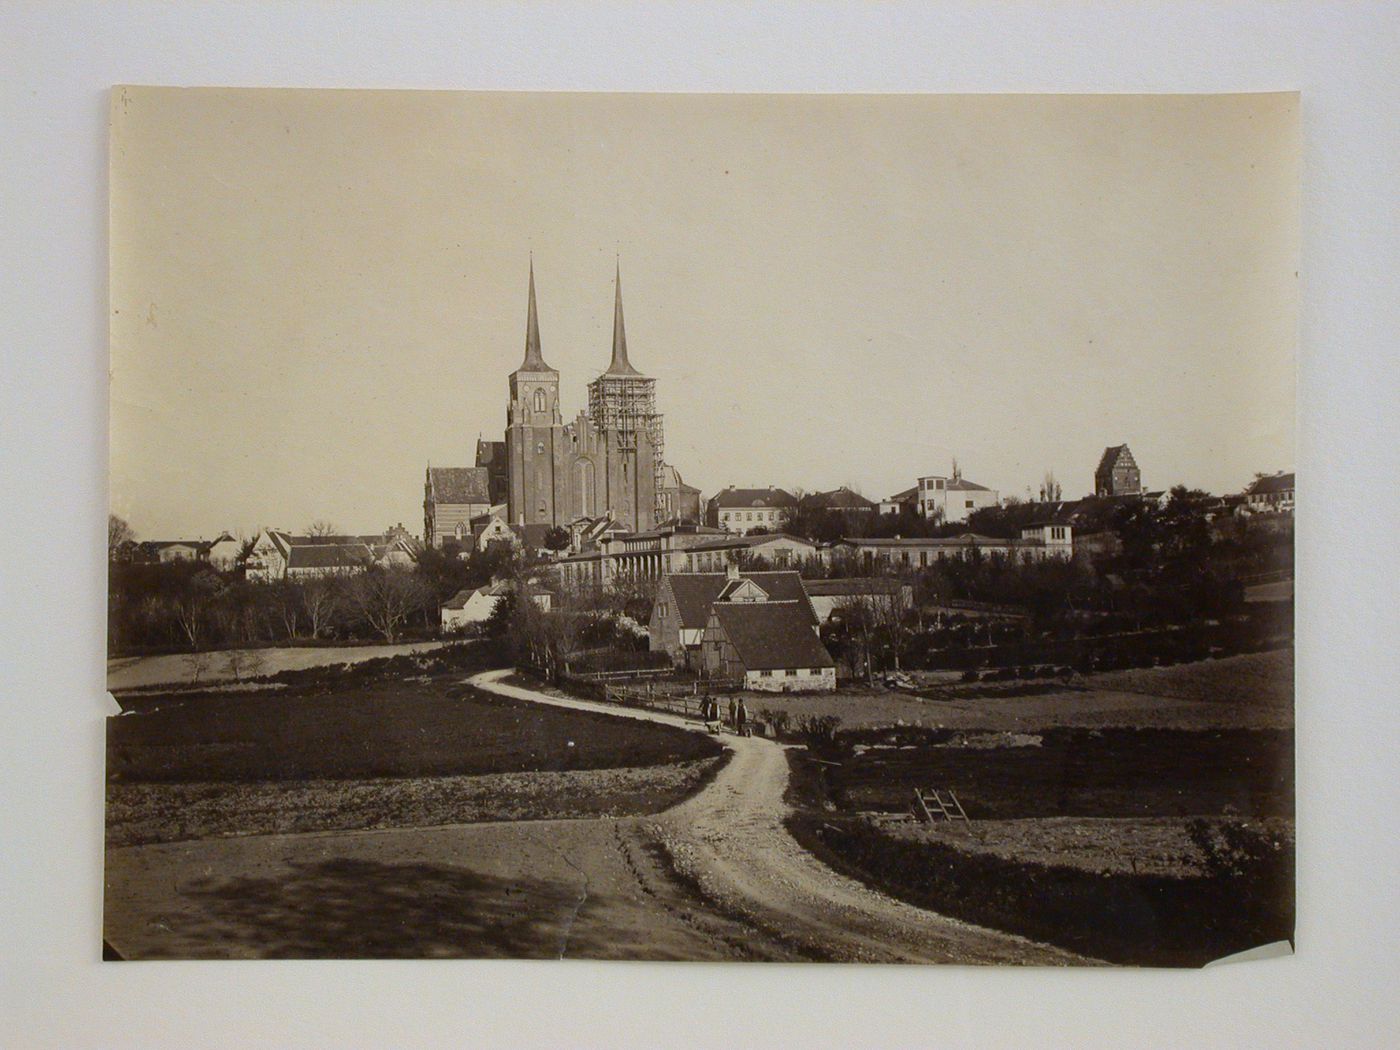 View of an unidentified church in the countryside, possibly Denmark